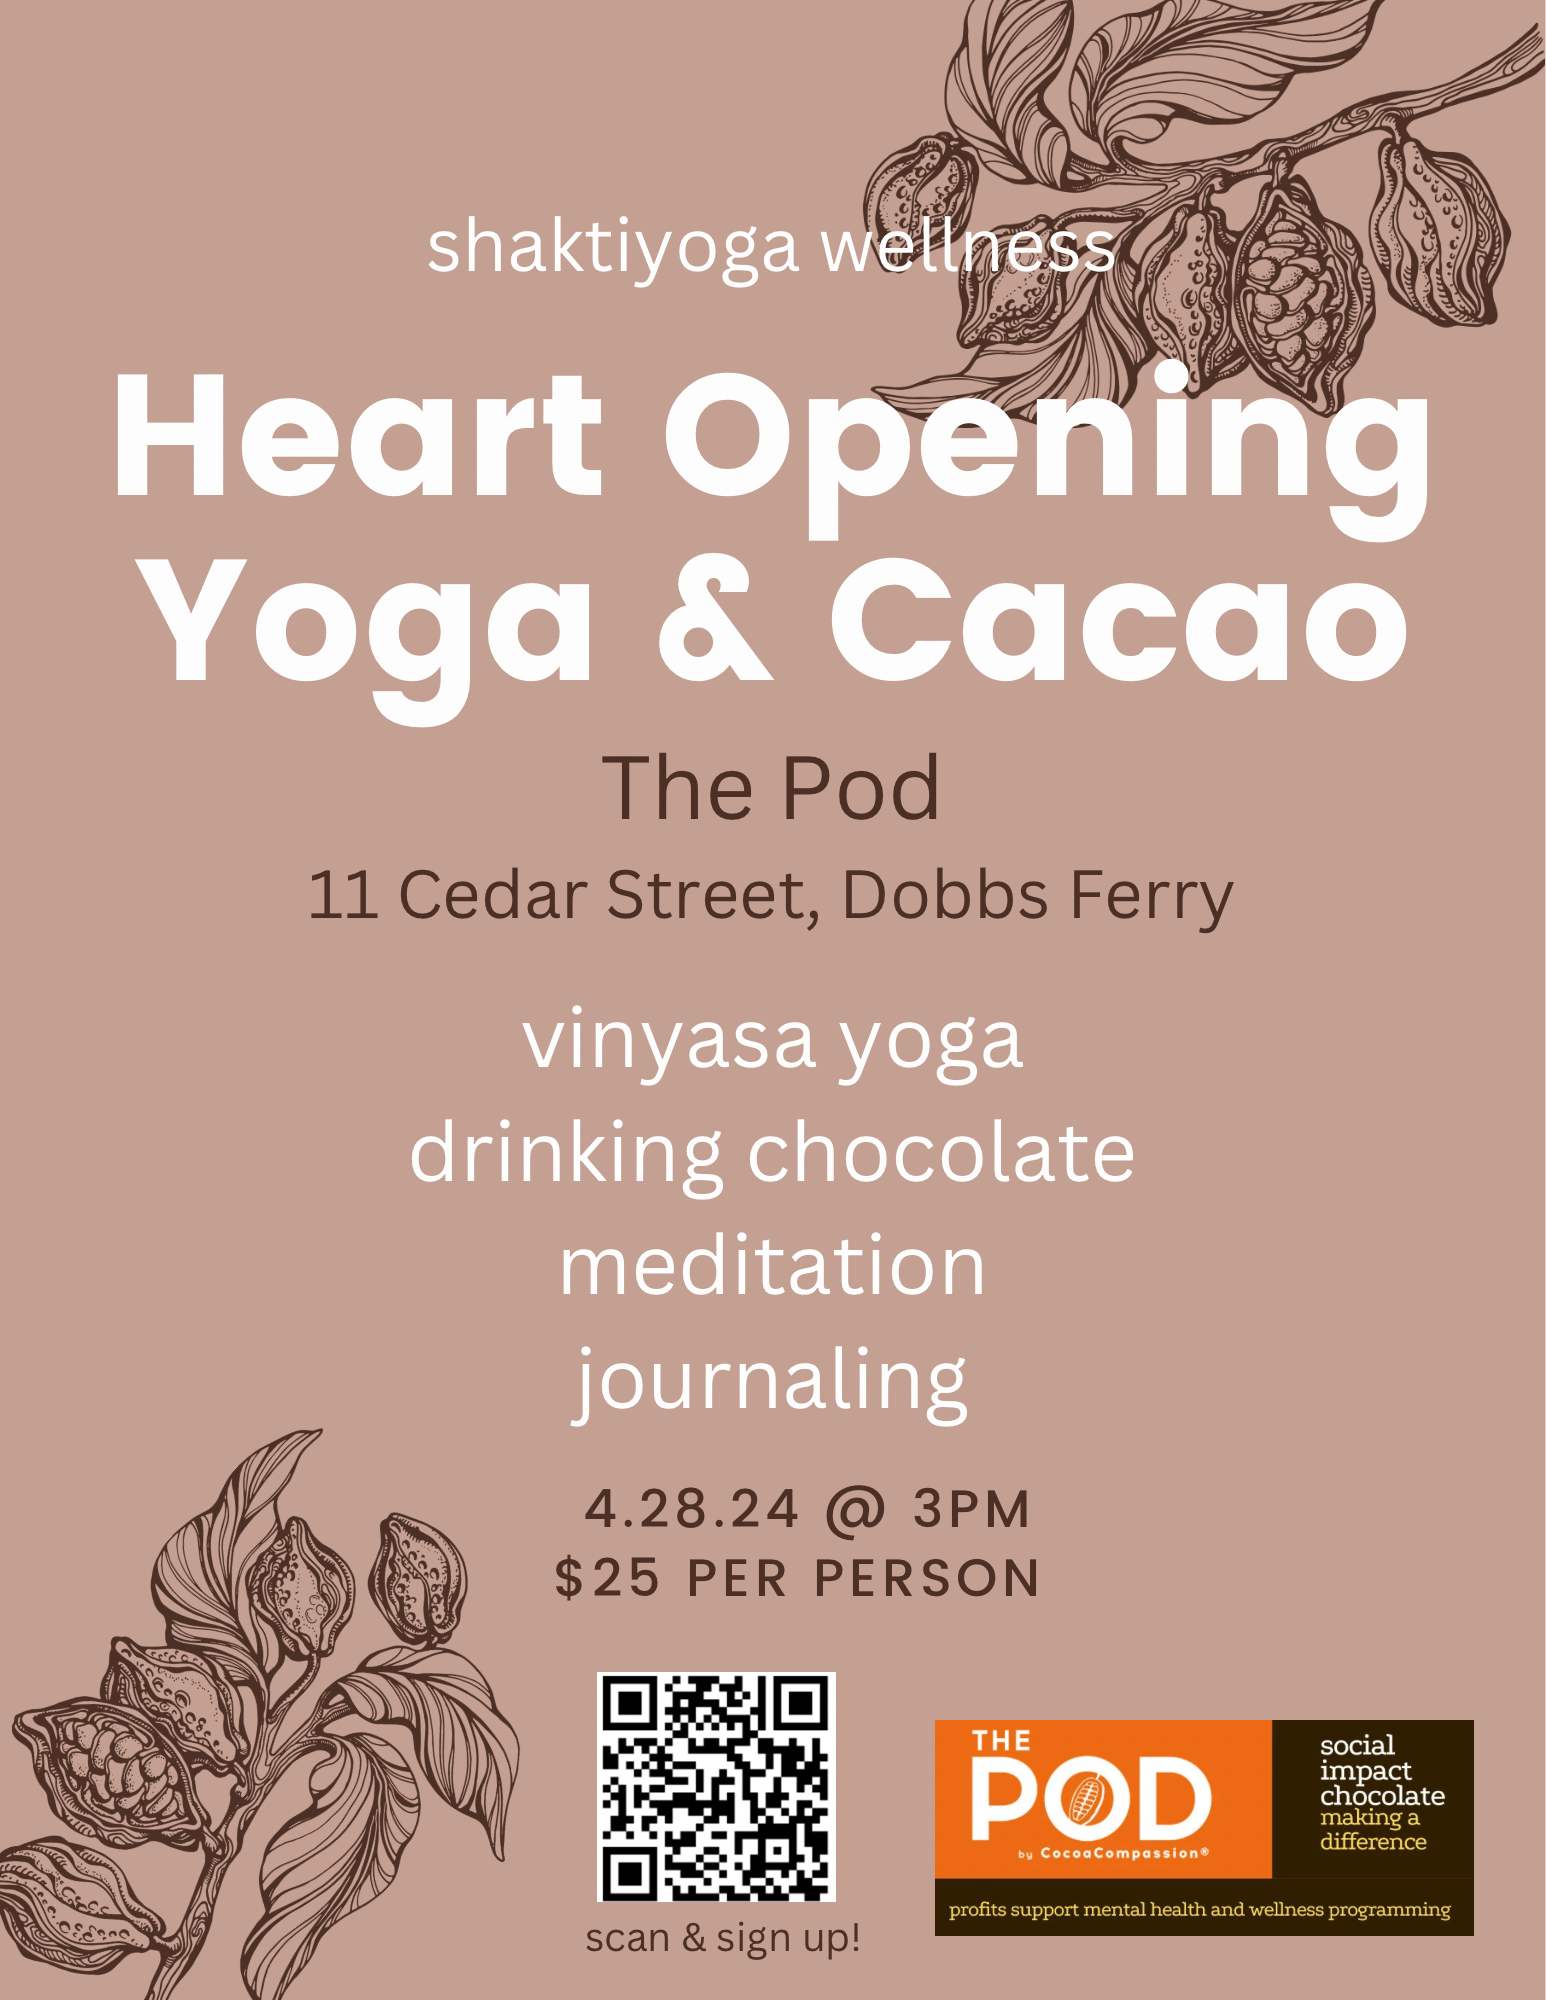 Heart Opening Yoga & Cacao Workshop 